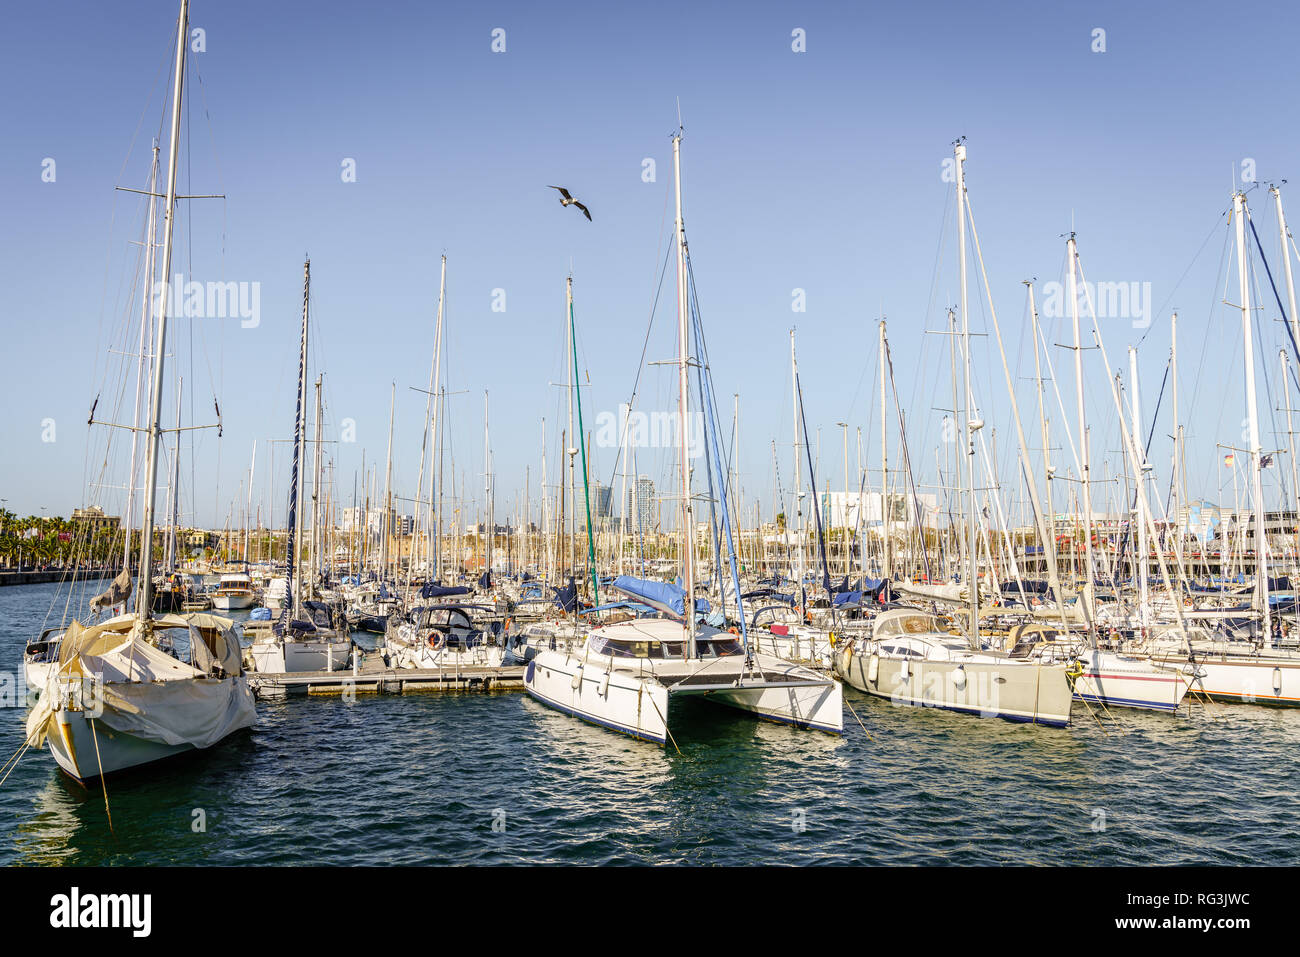 Sailboats docked at the marina in Barcelona on a bright spring day Stock Photo